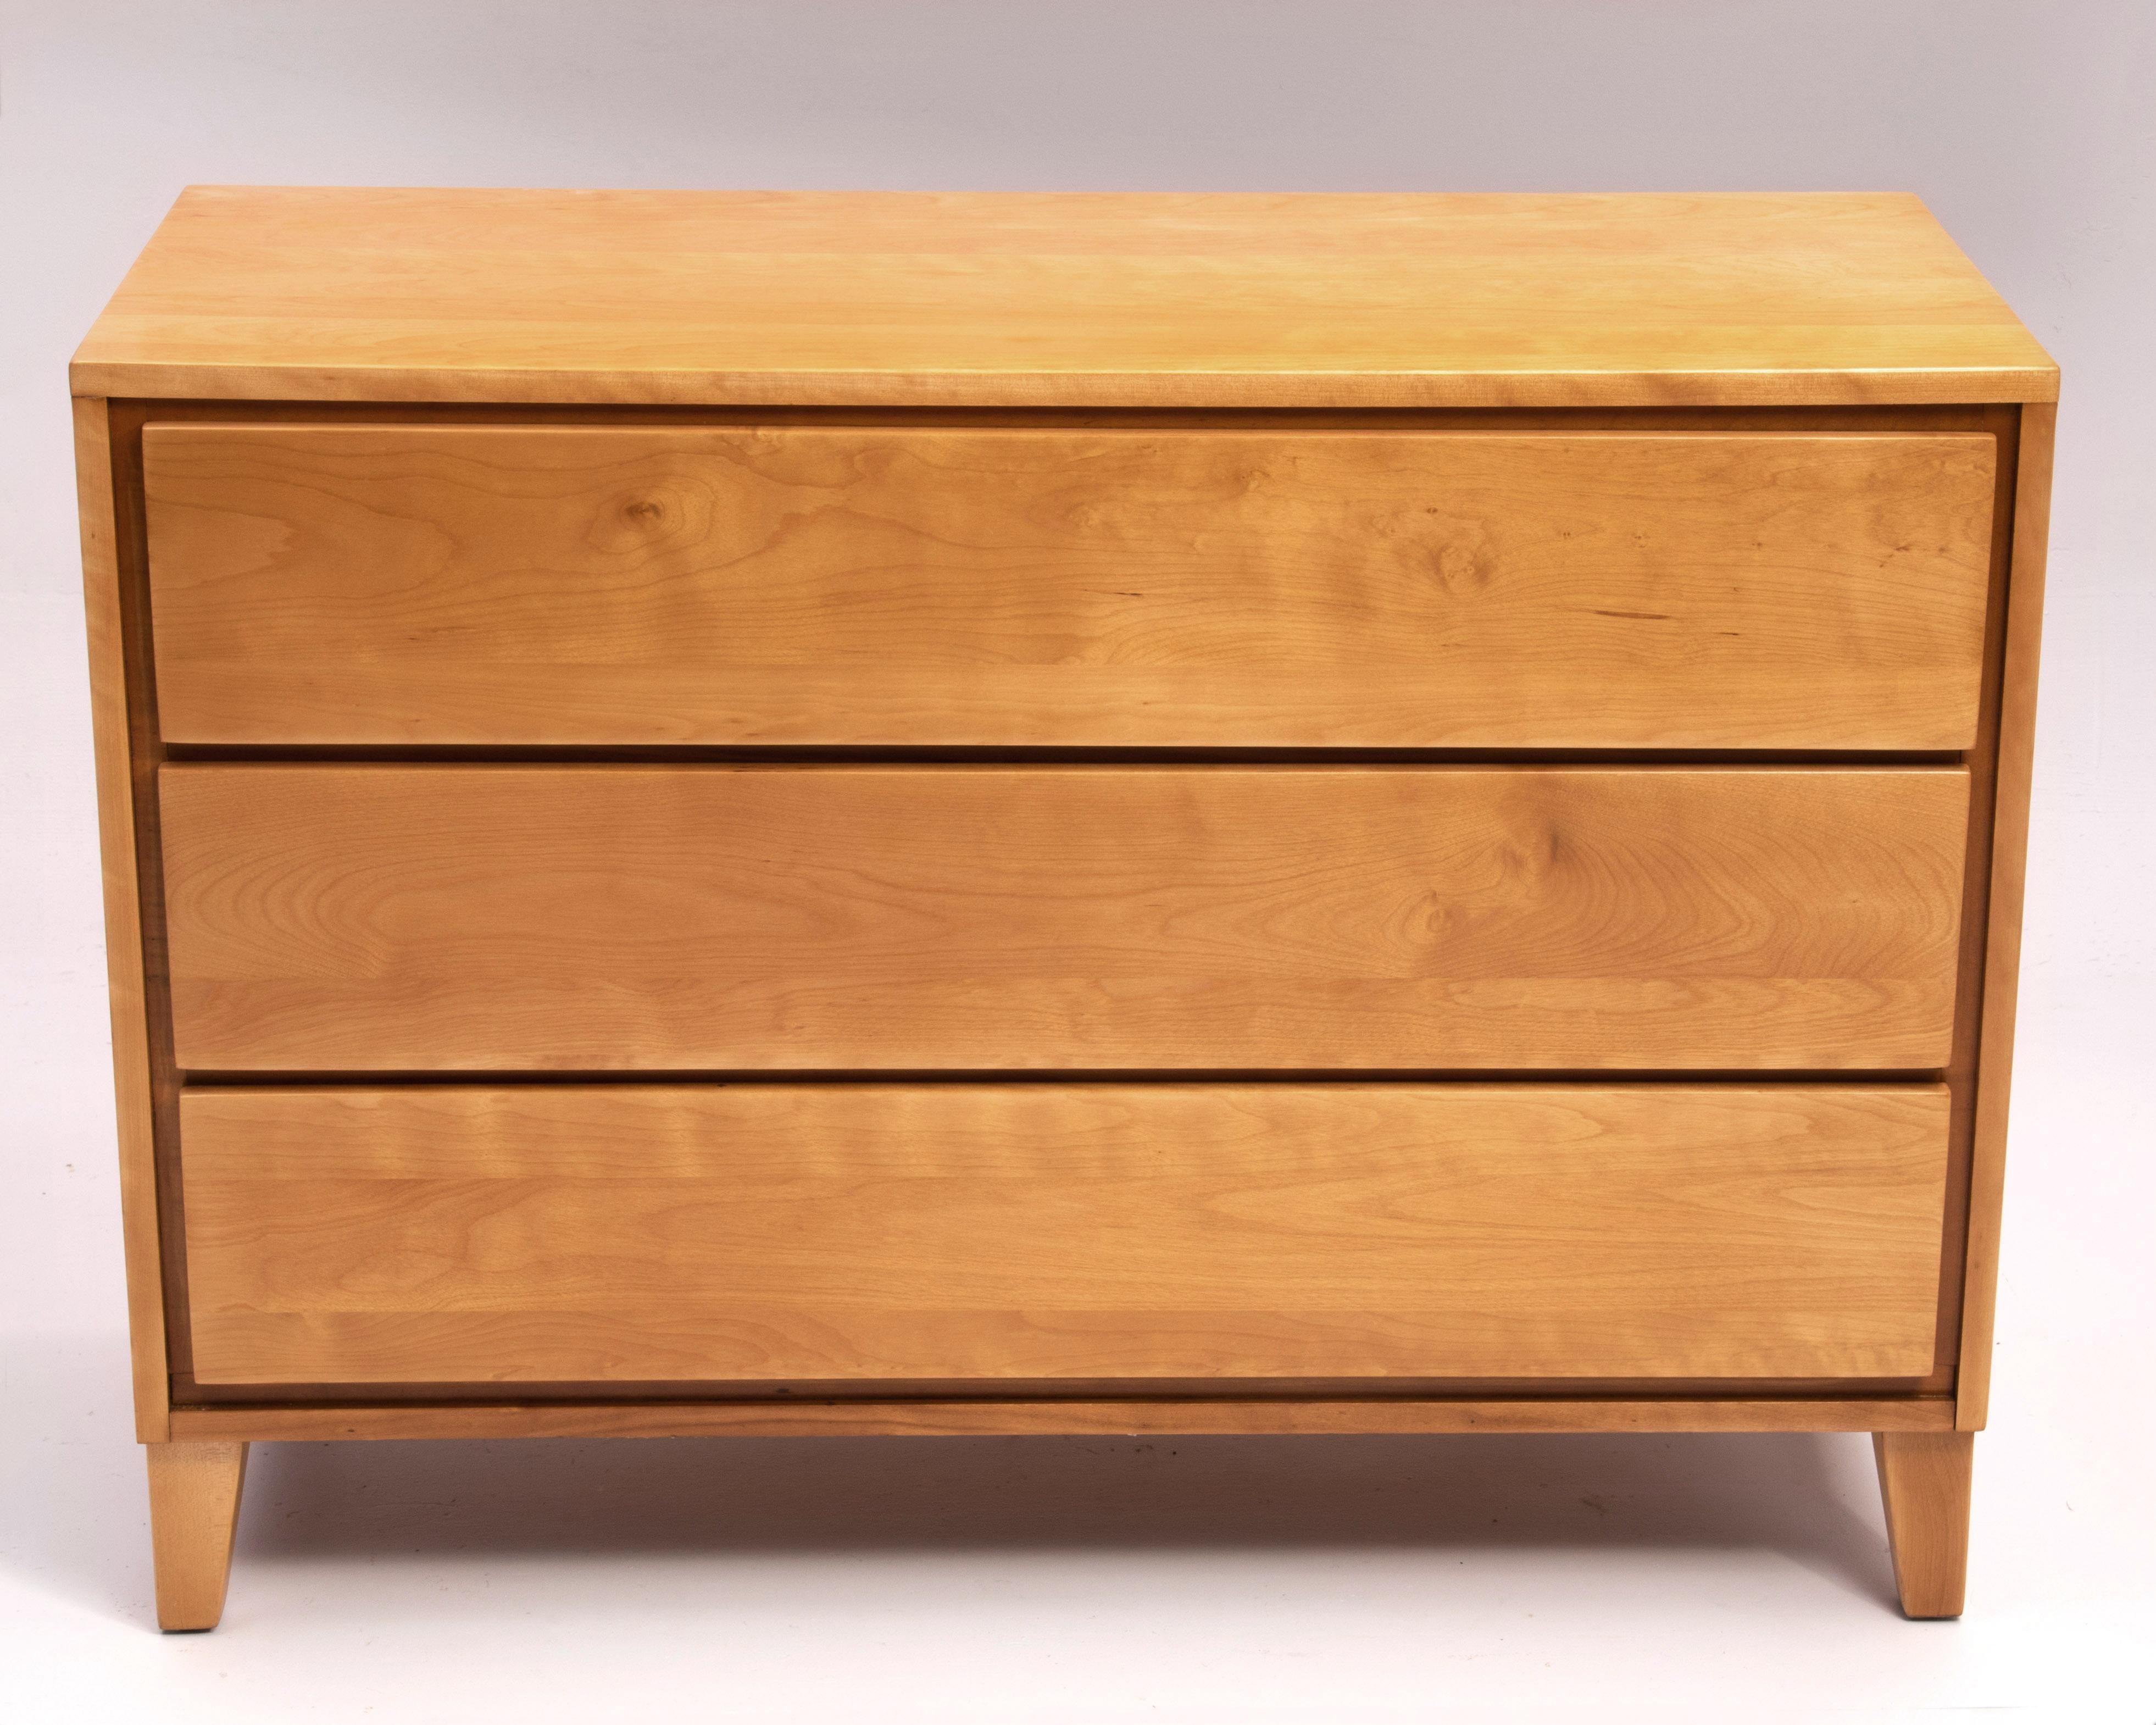 Leslie Diamond Conant Ball Mid Century Modern Three Drawer Birch Chest Dresser  In Good Condition For Sale In Forest Grove, PA